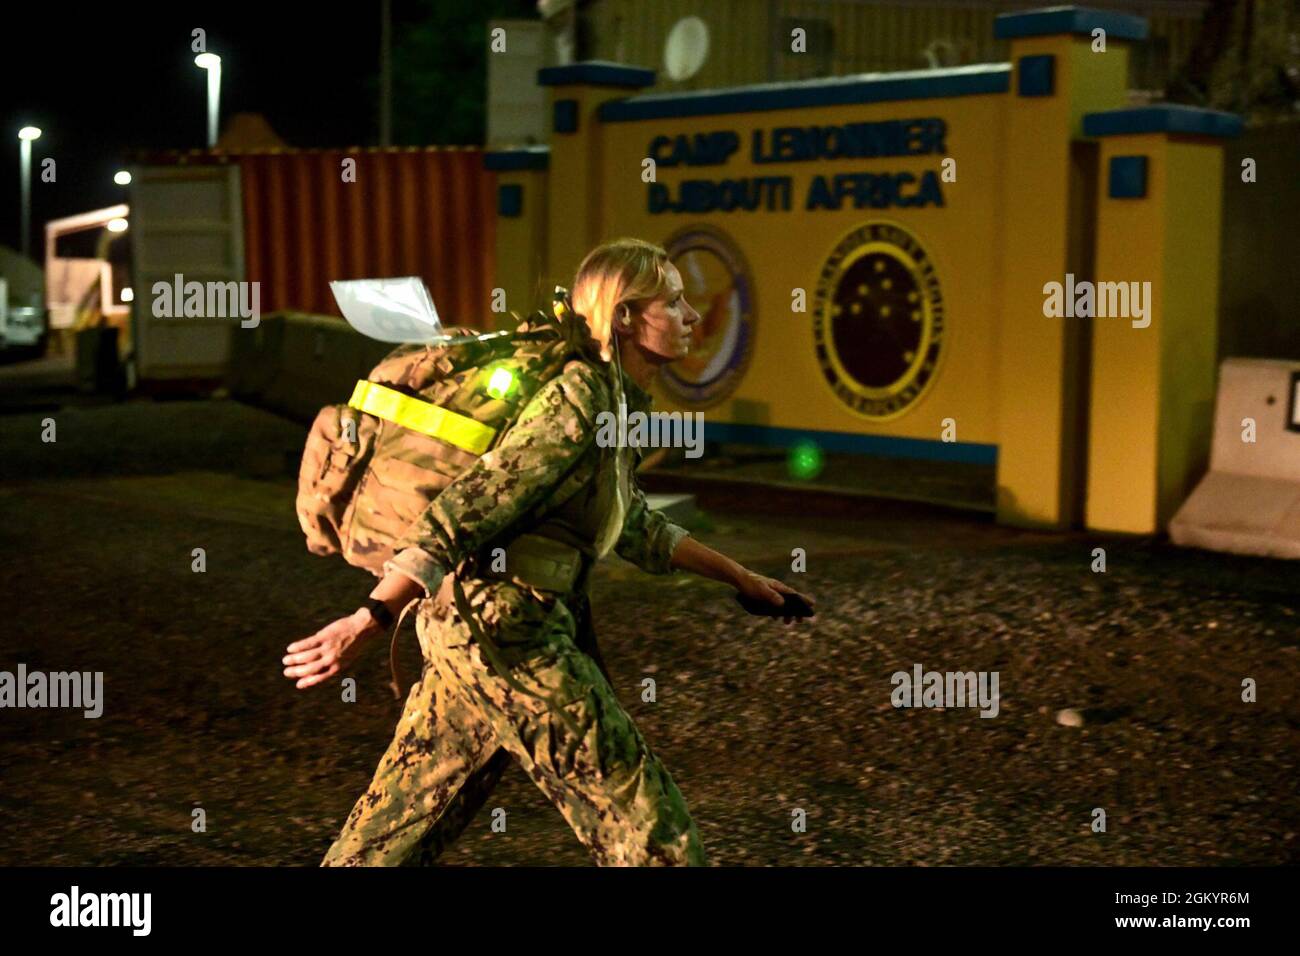 https://c8.alamy.com/comp/2GKYR6M/camp-lemonnier-djibouti-july-31-2021-us-navy-master-of-arms-1st-class-casey-bergschneider-from-mattoon-ill-participates-in-the-norwegian-foot-march-the-norwegian-foot-march-is-an-186-mile-foot-march-while-carrying-a-25-pound-rucksack-the-norwegian-foot-march-or-marsjmerket-is-a-norwegian-armed-forces-skill-badge-that-is-earned-it-originated-in-1915-for-the-purpose-of-exposing-civilians-and-new-military-recruits-to-what-it-is-like-to-be-in-the-field-since-then-it-has-evolved-to-become-a-foreign-service-badge-earned-by-completing-the-foot-march-to-standard-those-who-complete-th-2GKYR6M.jpg